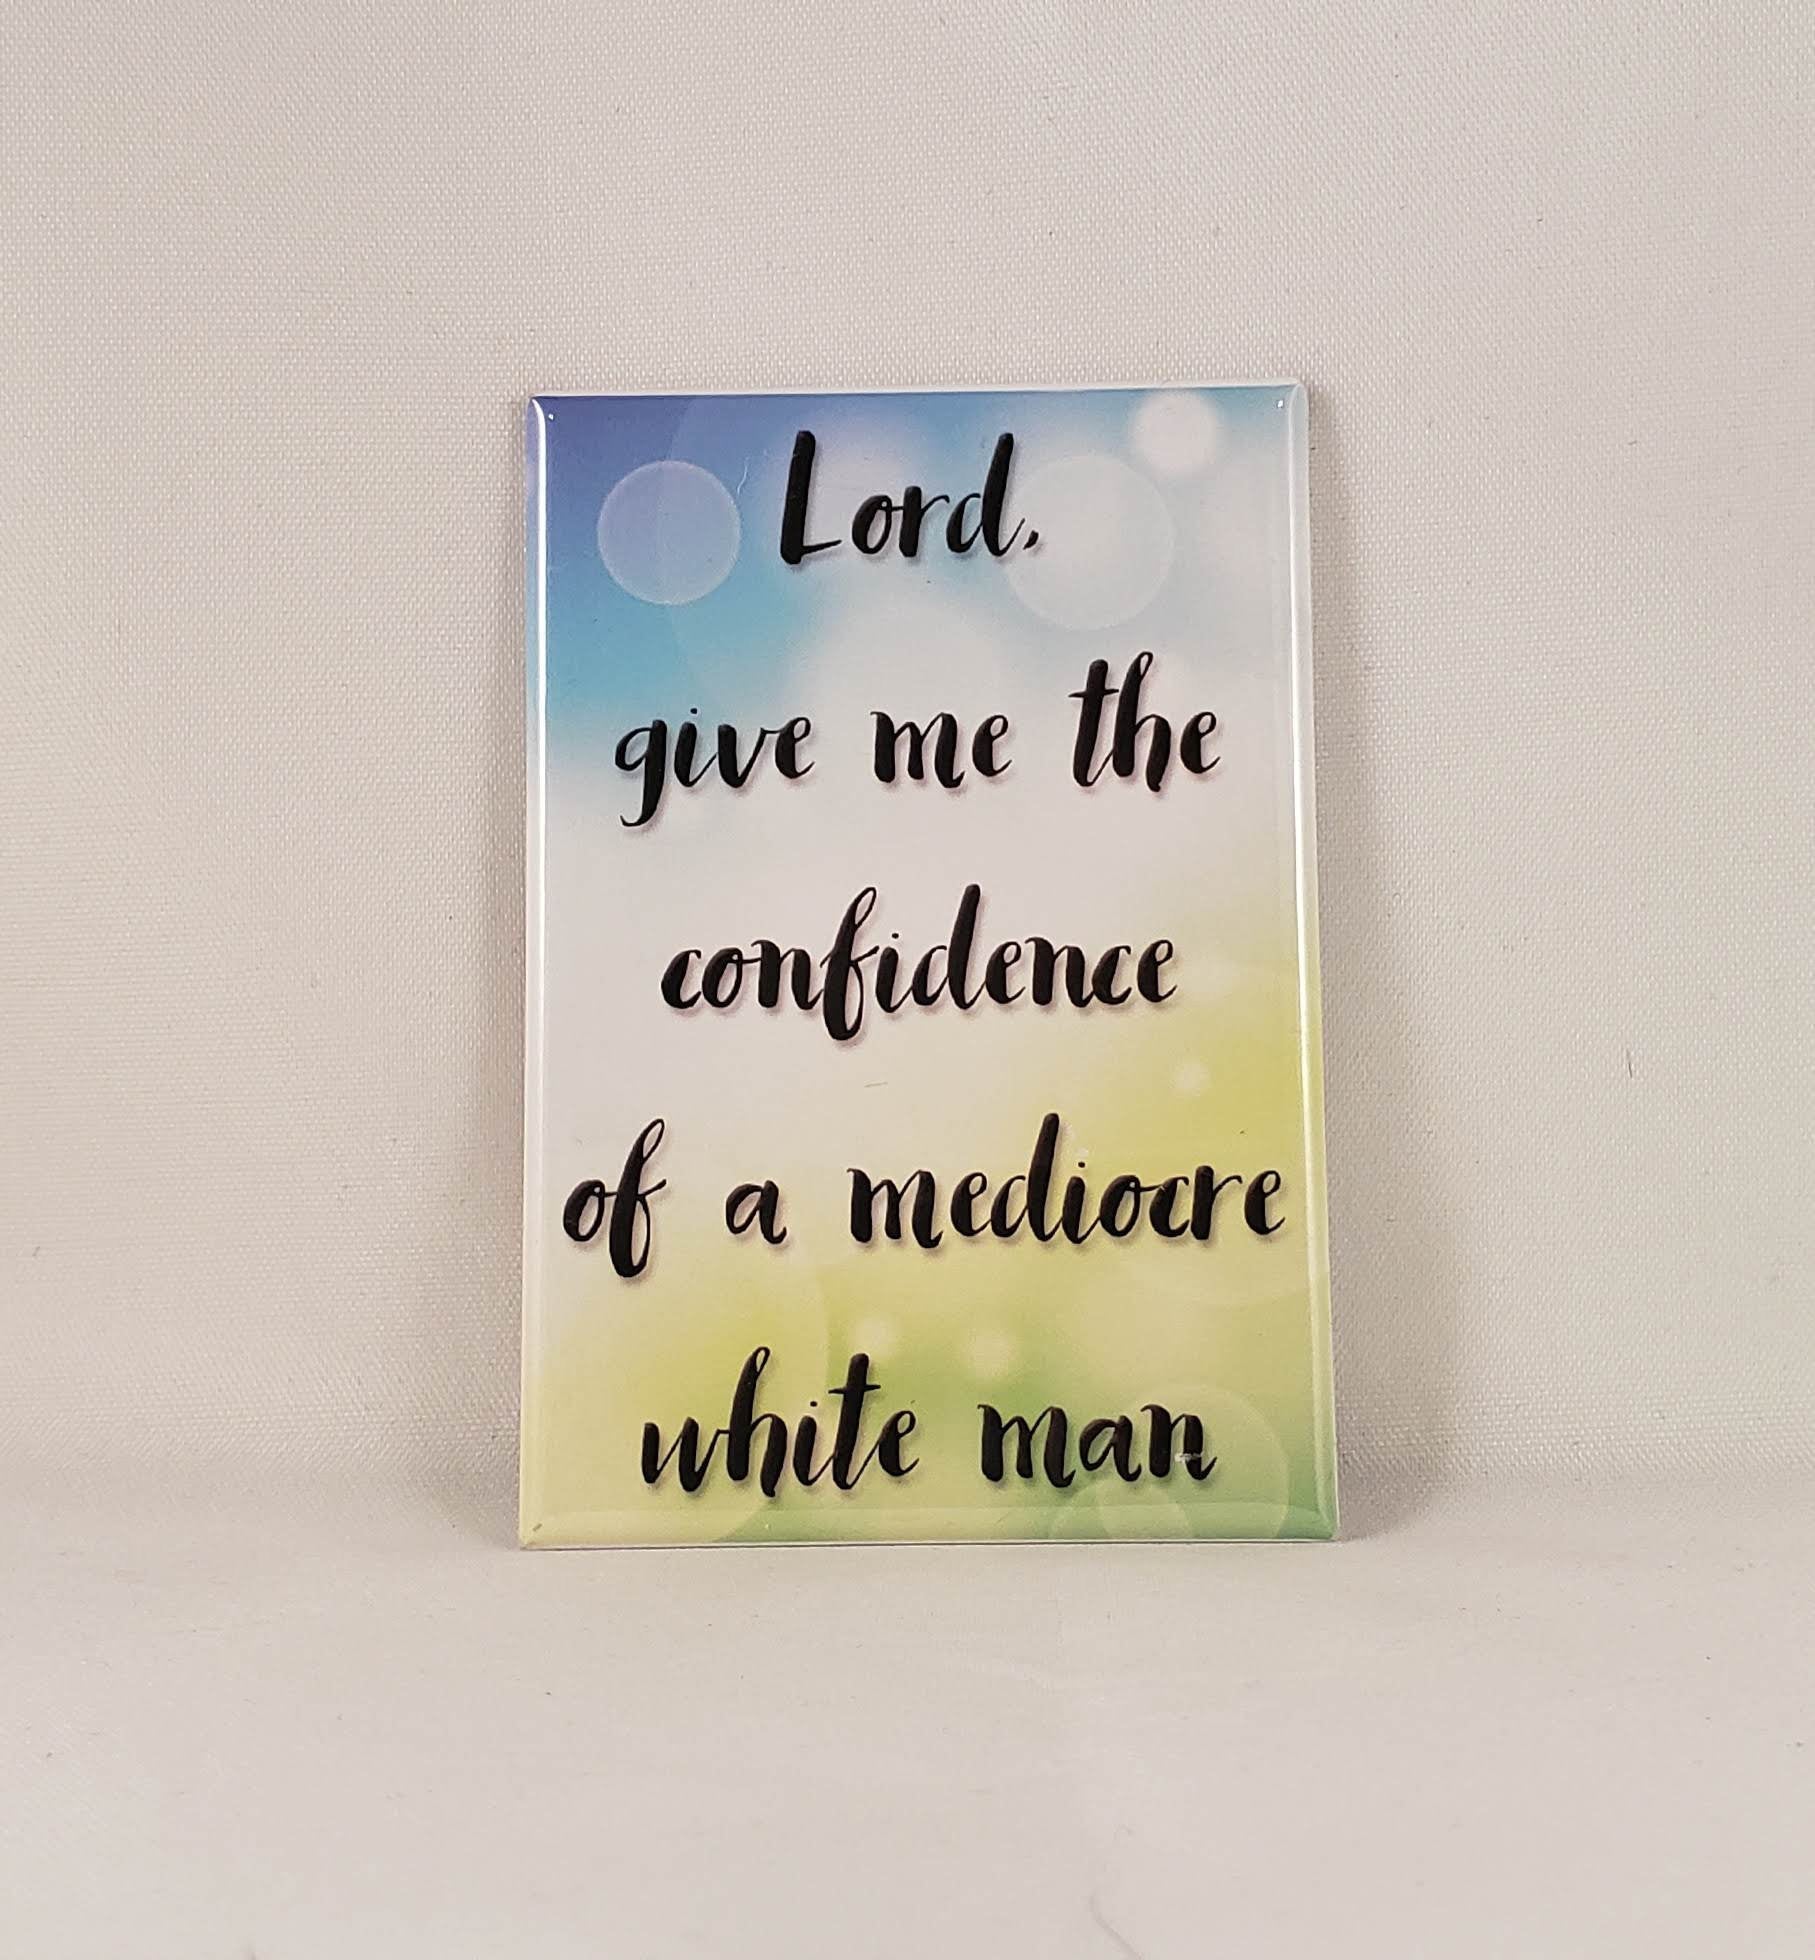 Confidence of a mediocre white man refrigerator magnet quote